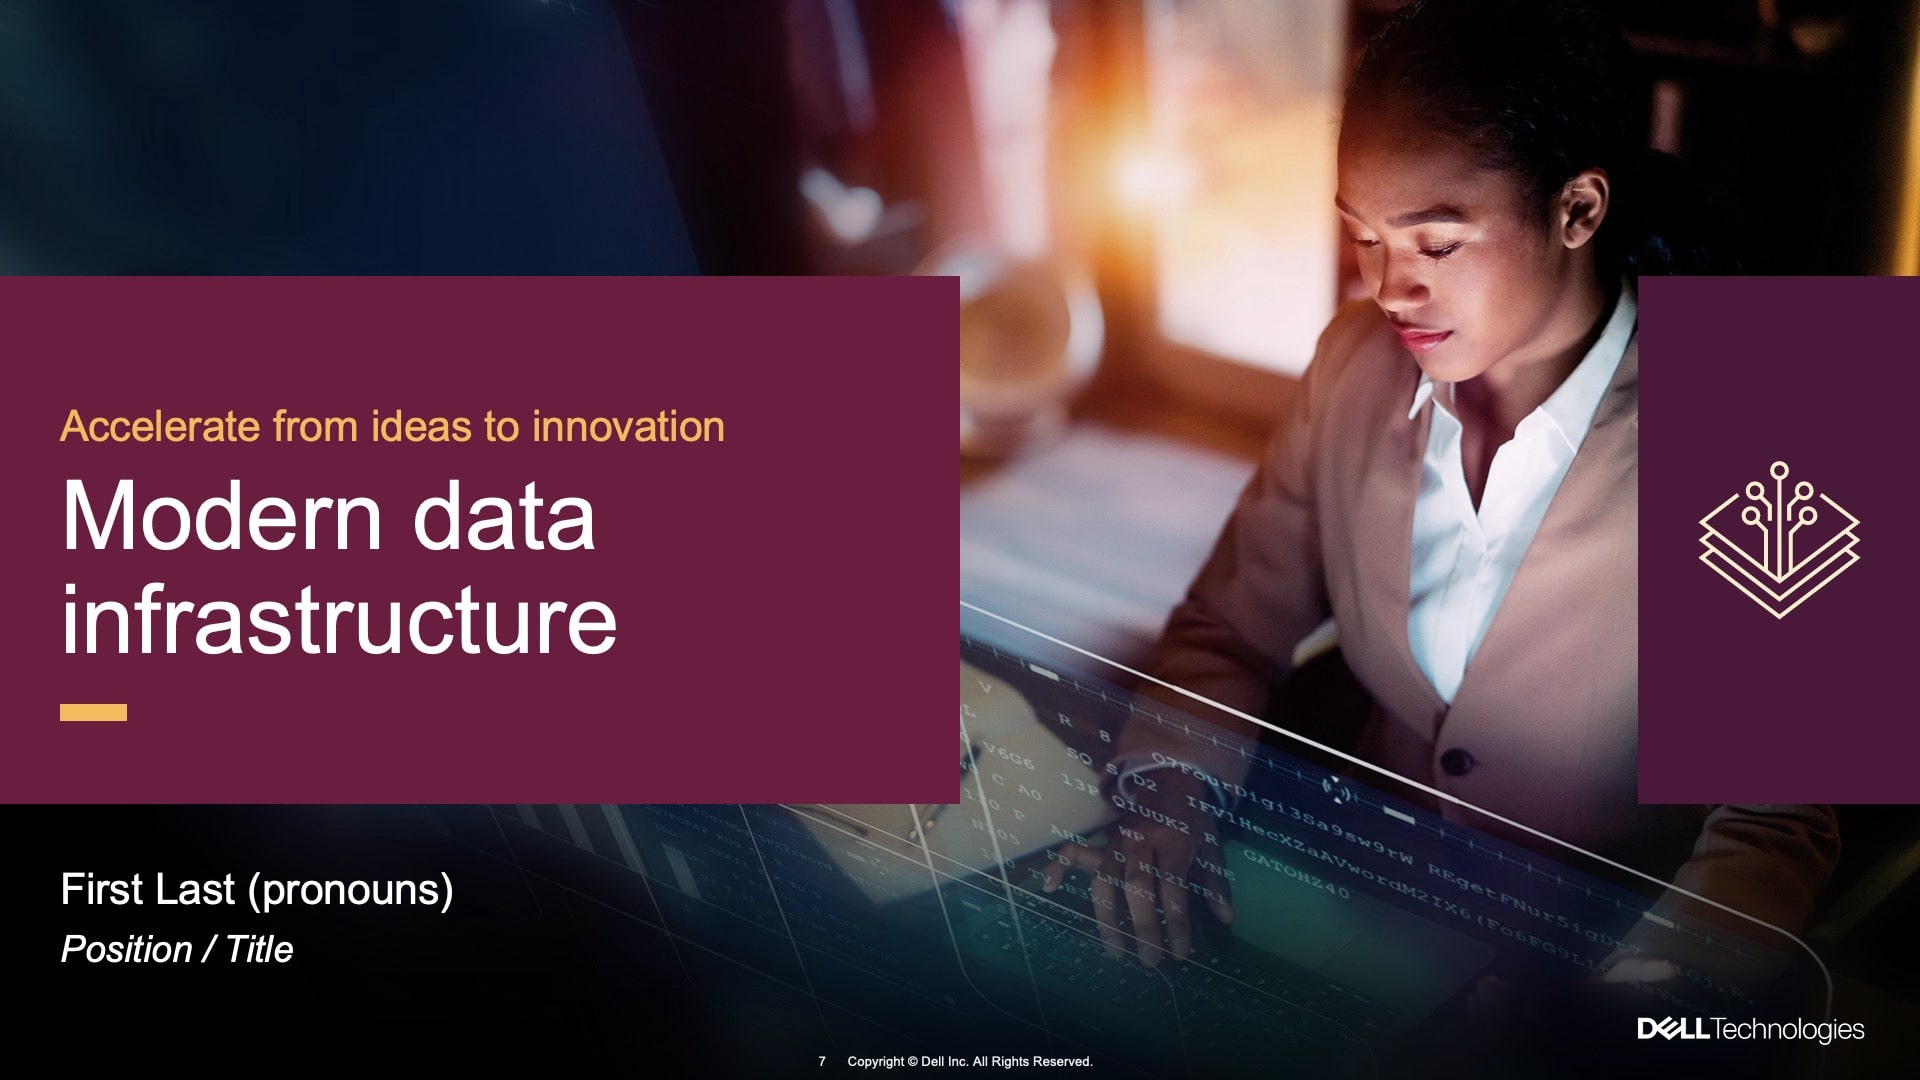 A slide from the Dell Technologies Advantage presentation. A woman works on a Dell laptop in an office. A red band has text that says "Modern data infrastructure".